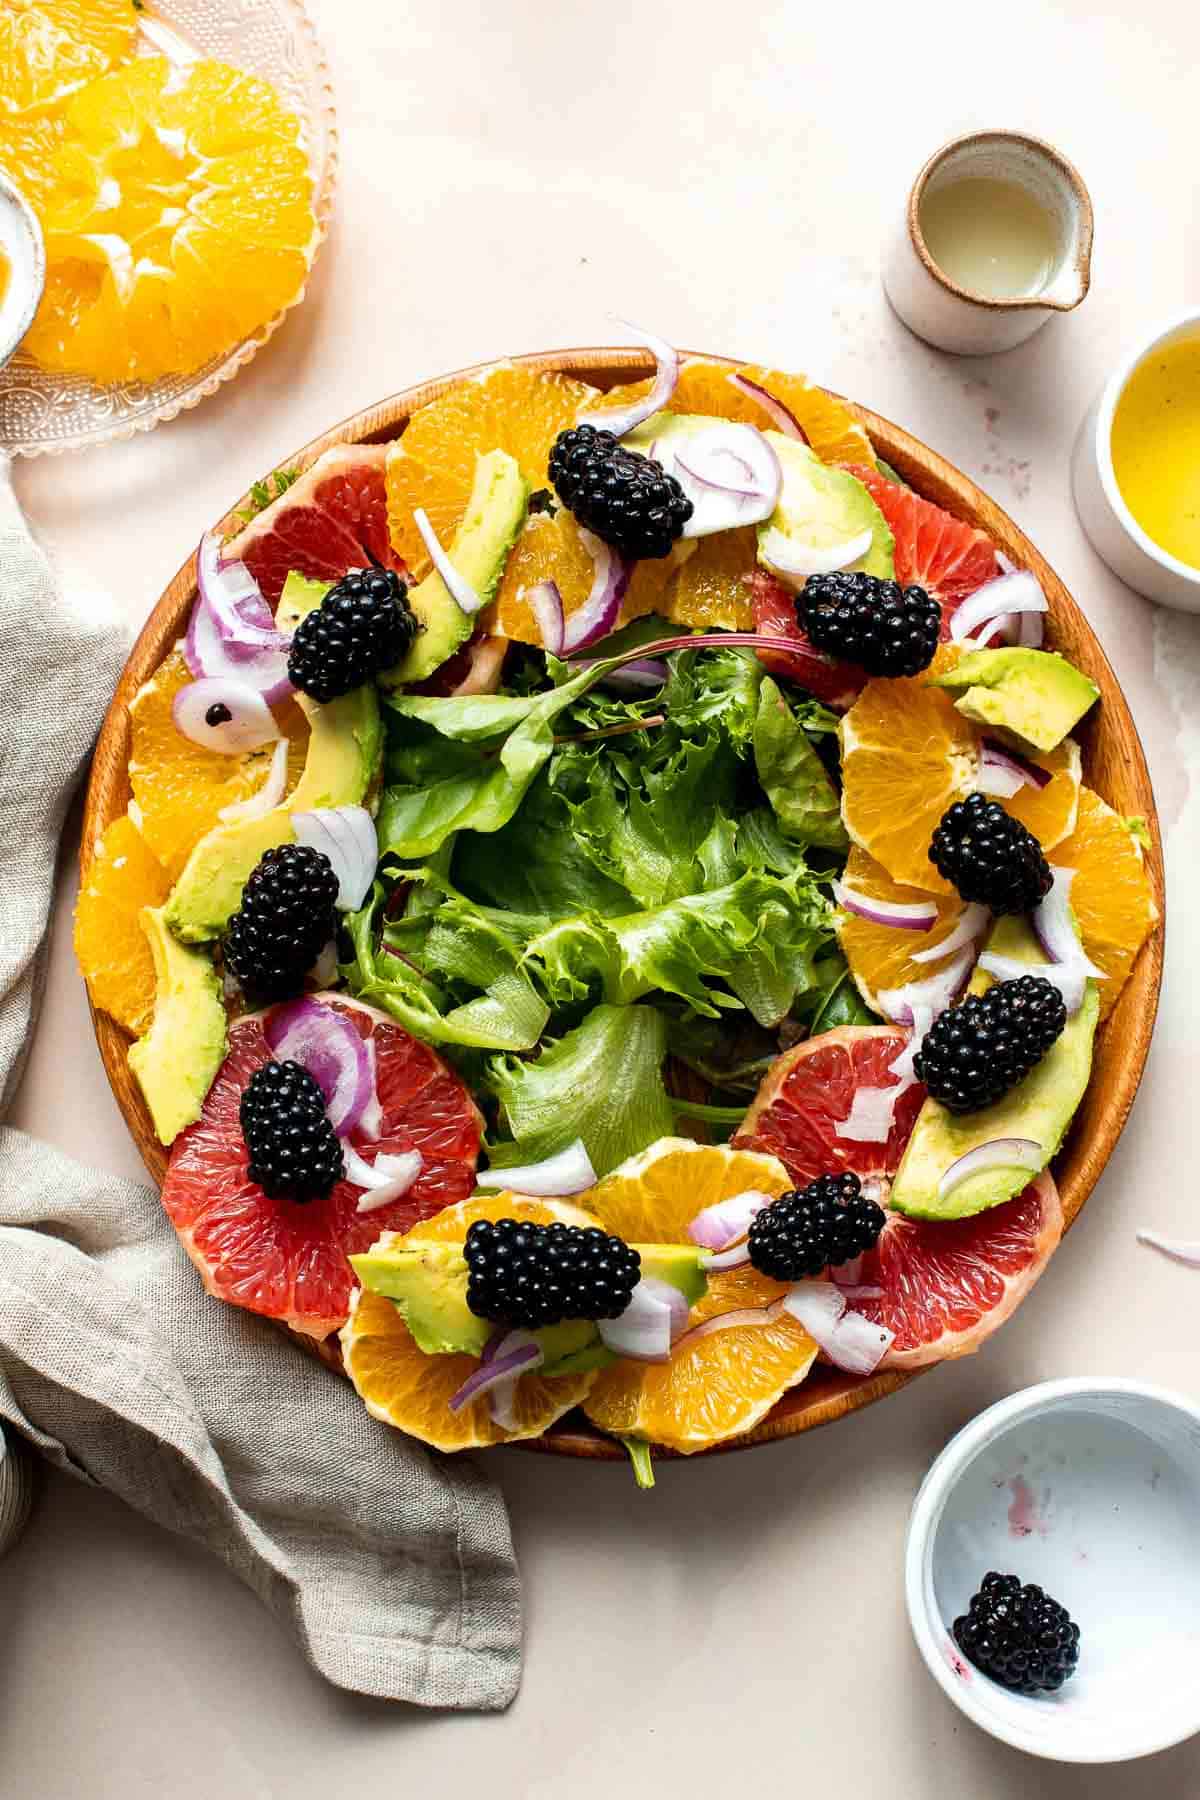 This Summer Citrus Salad is delicious, tangy, and colorful. It’s loaded with fresh fruit including oranges and grapefruit tossed in a citrus dressing. | aheadofthyme.com